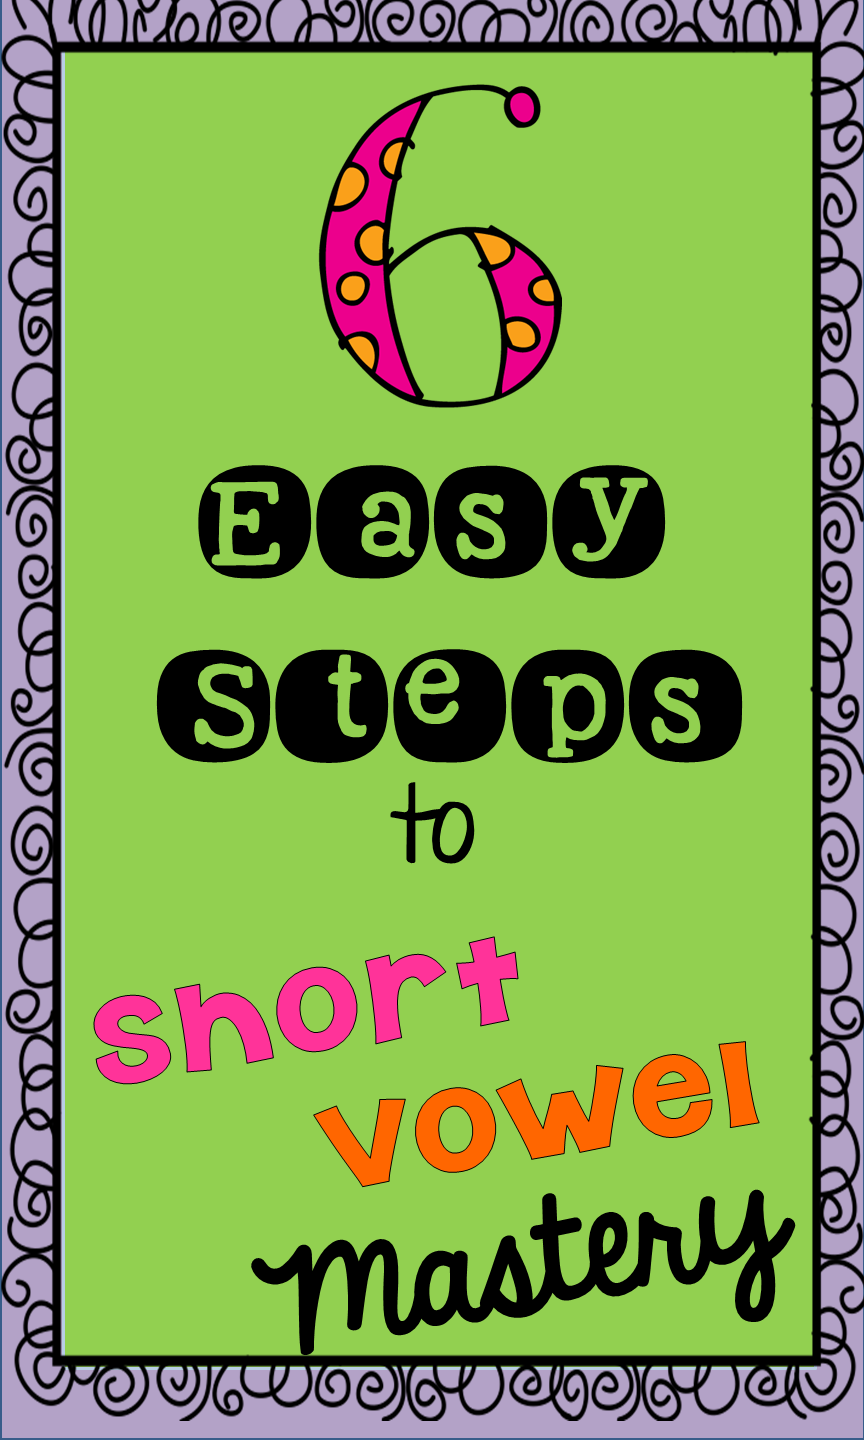 6 Easy Steps to Short Vowel Mastery